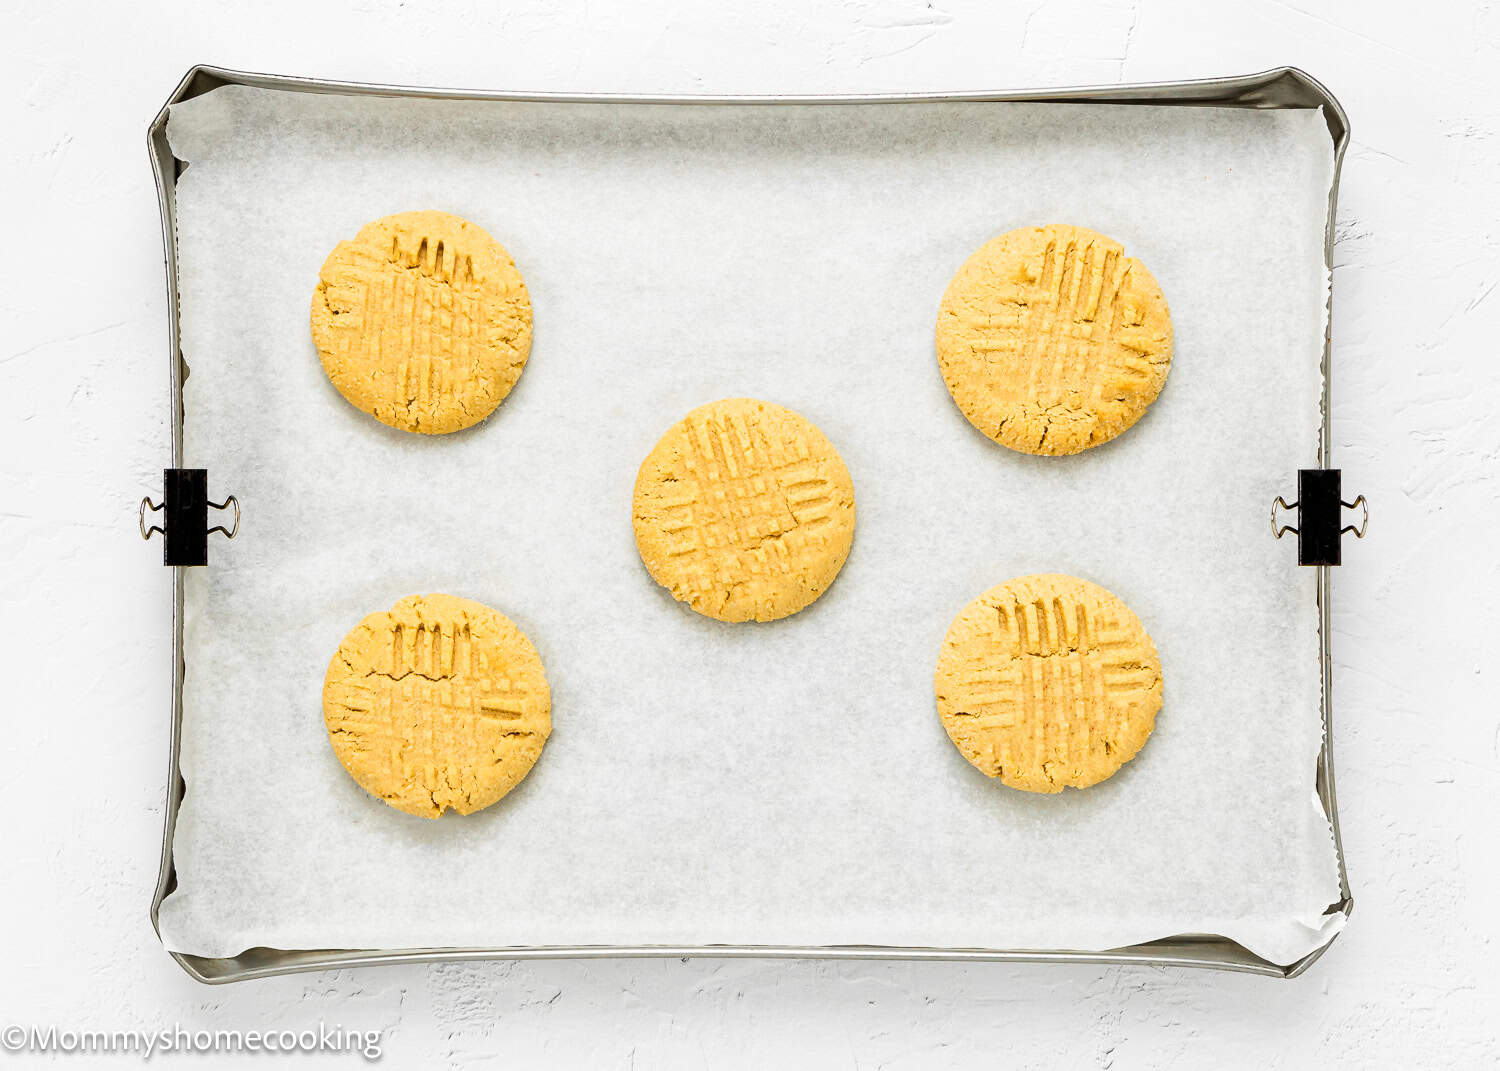 baked Eggless Peanut Butter Cookies in a baking sheet.